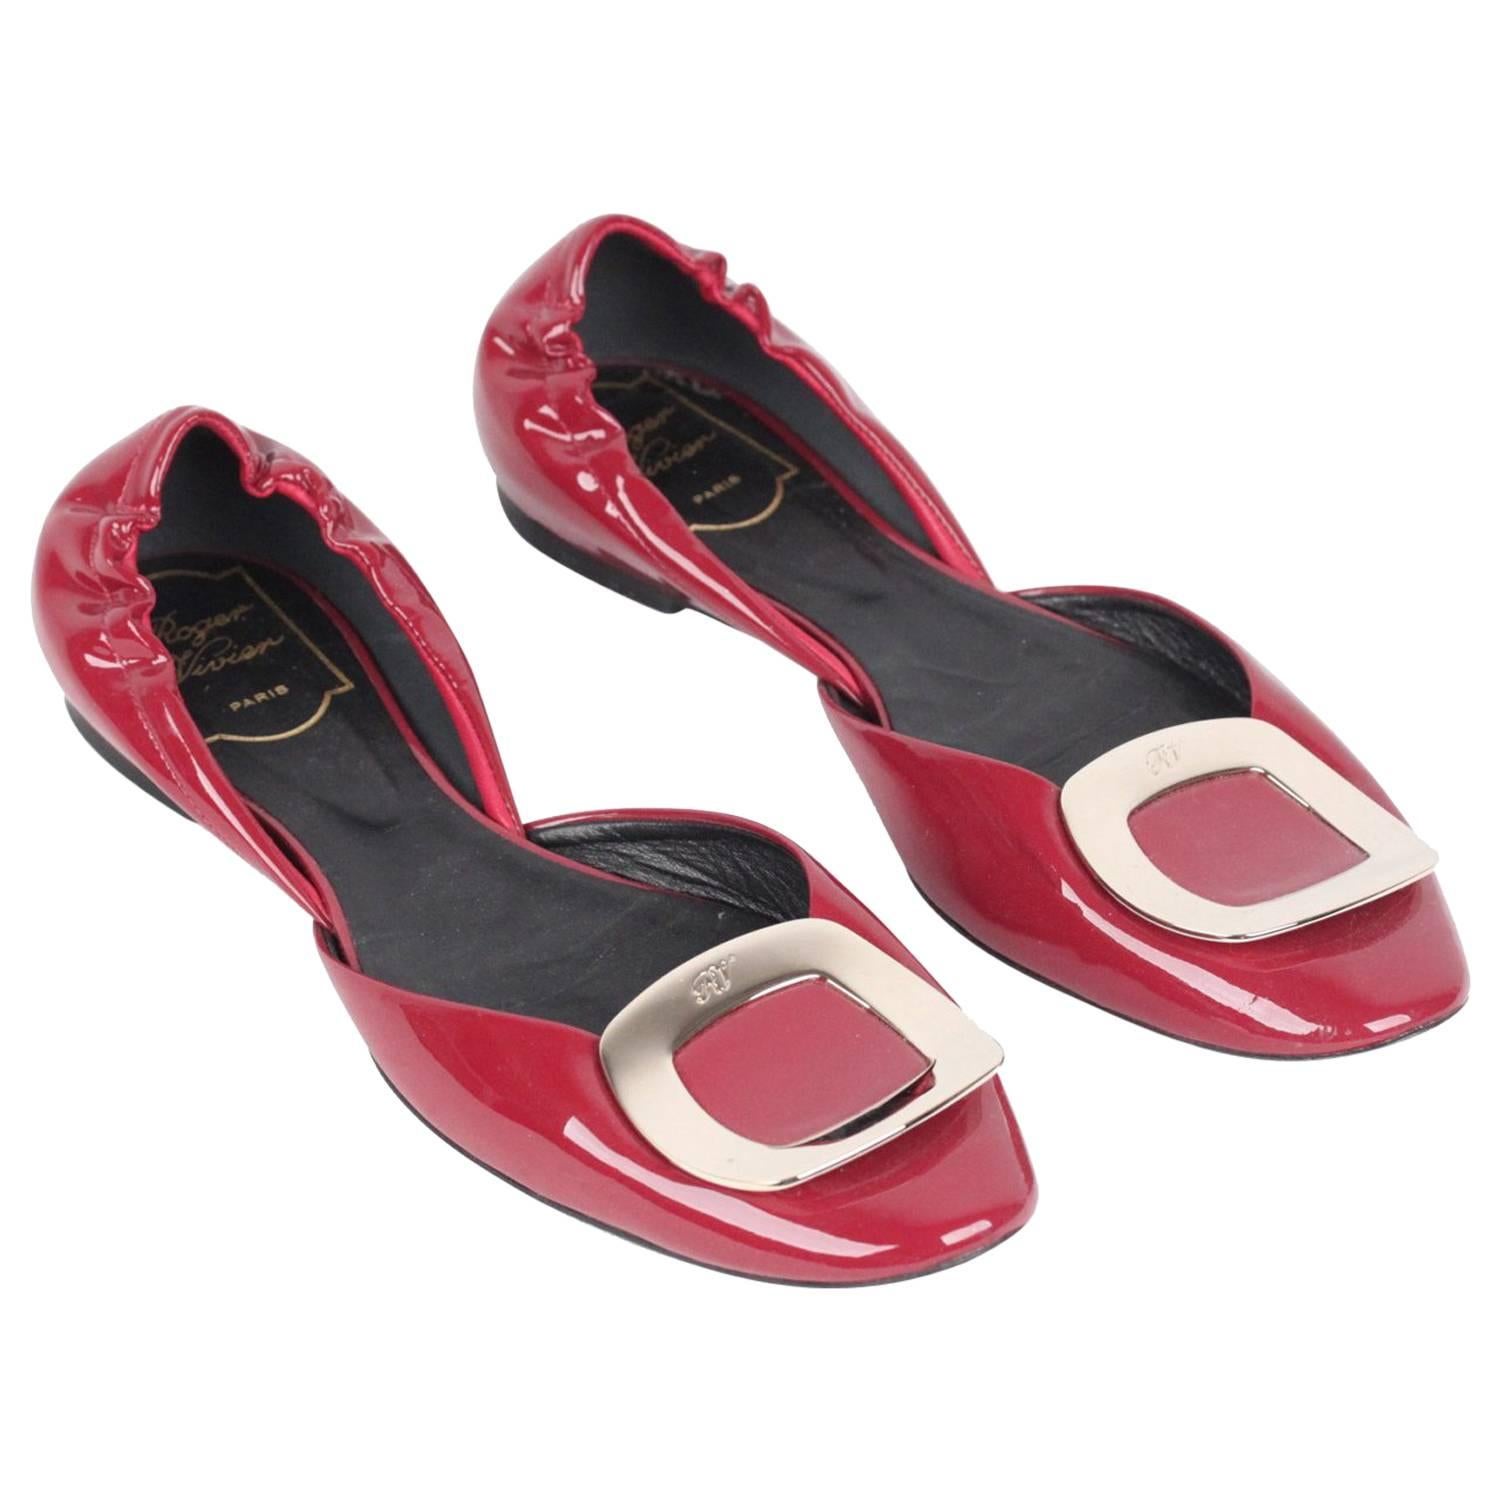 ROGER VIVIER Burgundy Patent Leather CUT OUT BALLERINA Flat Shoes SIZE 38